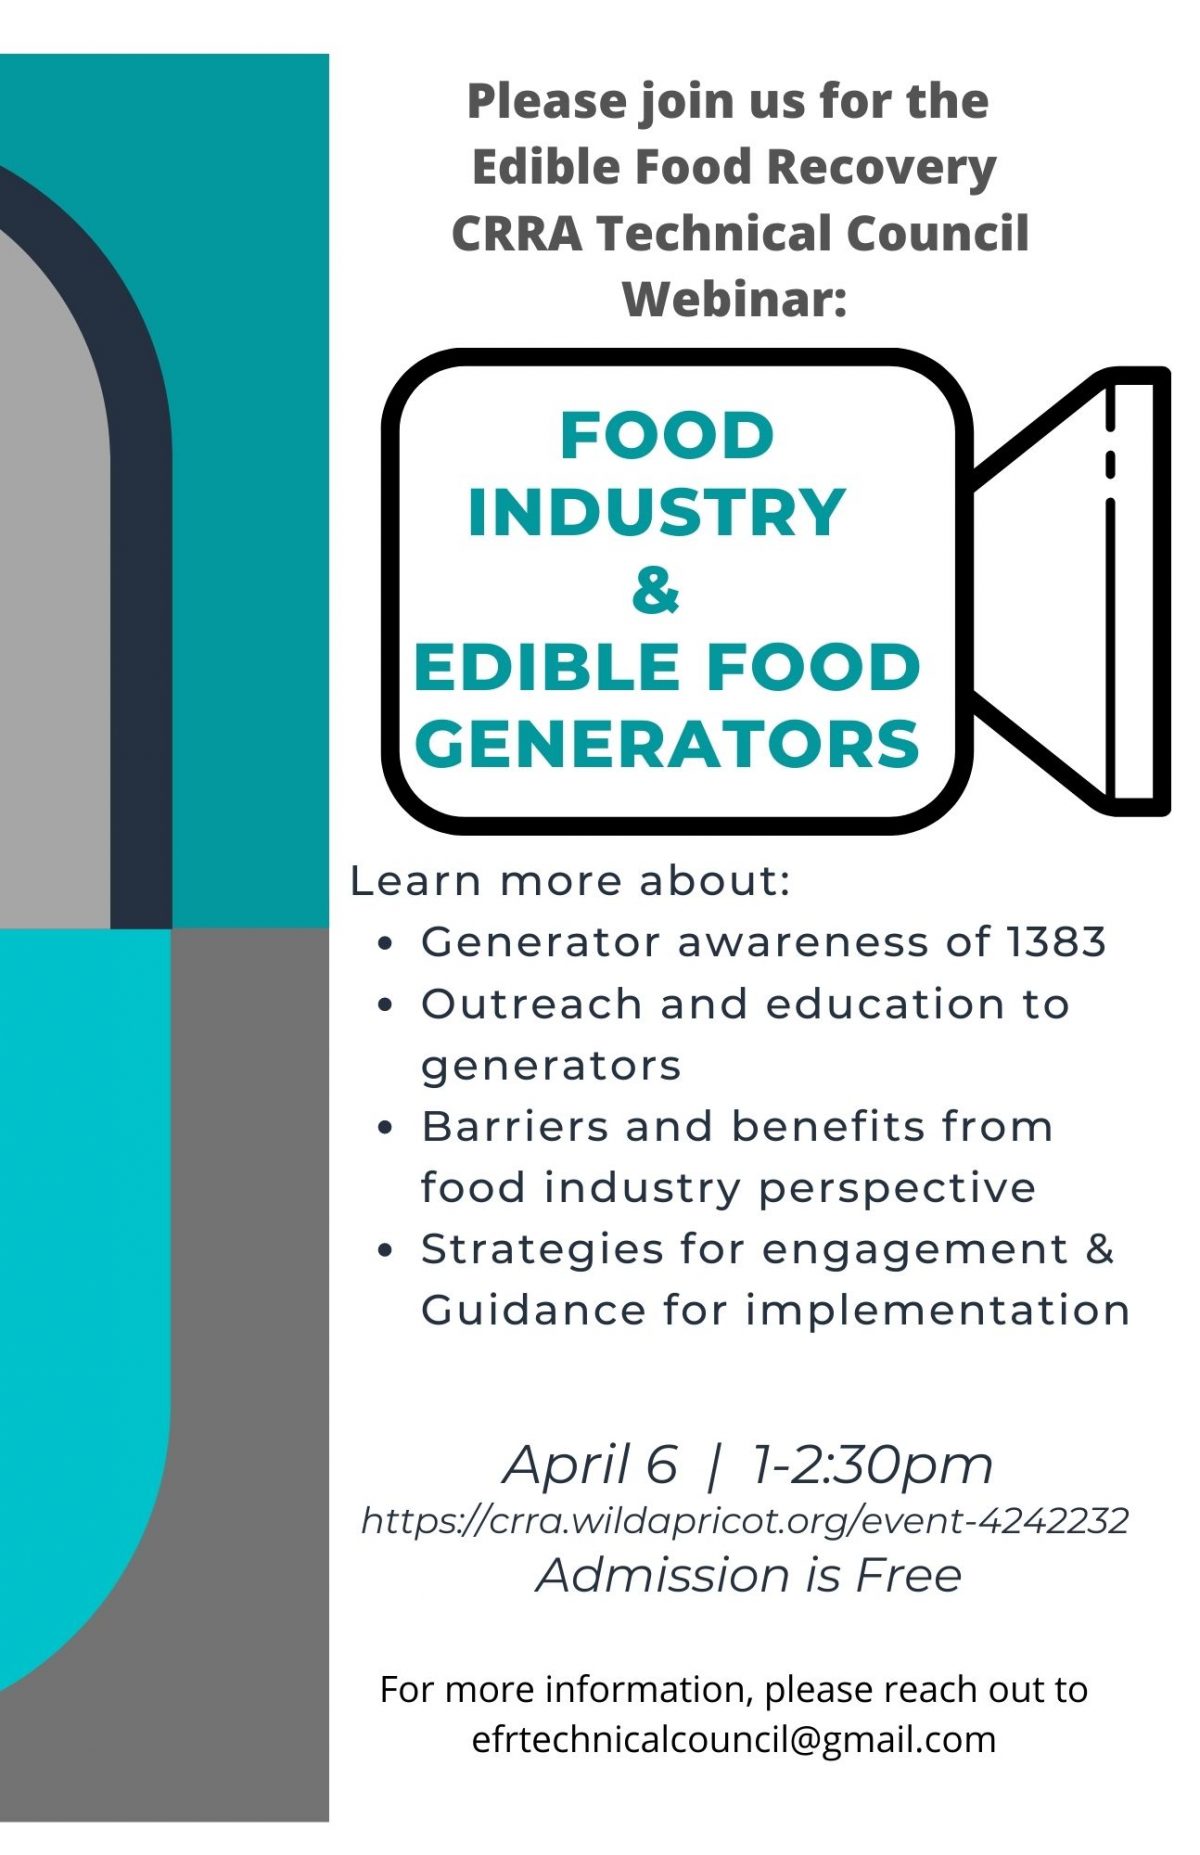 Edible Food Recovery Technical Council, 4/21